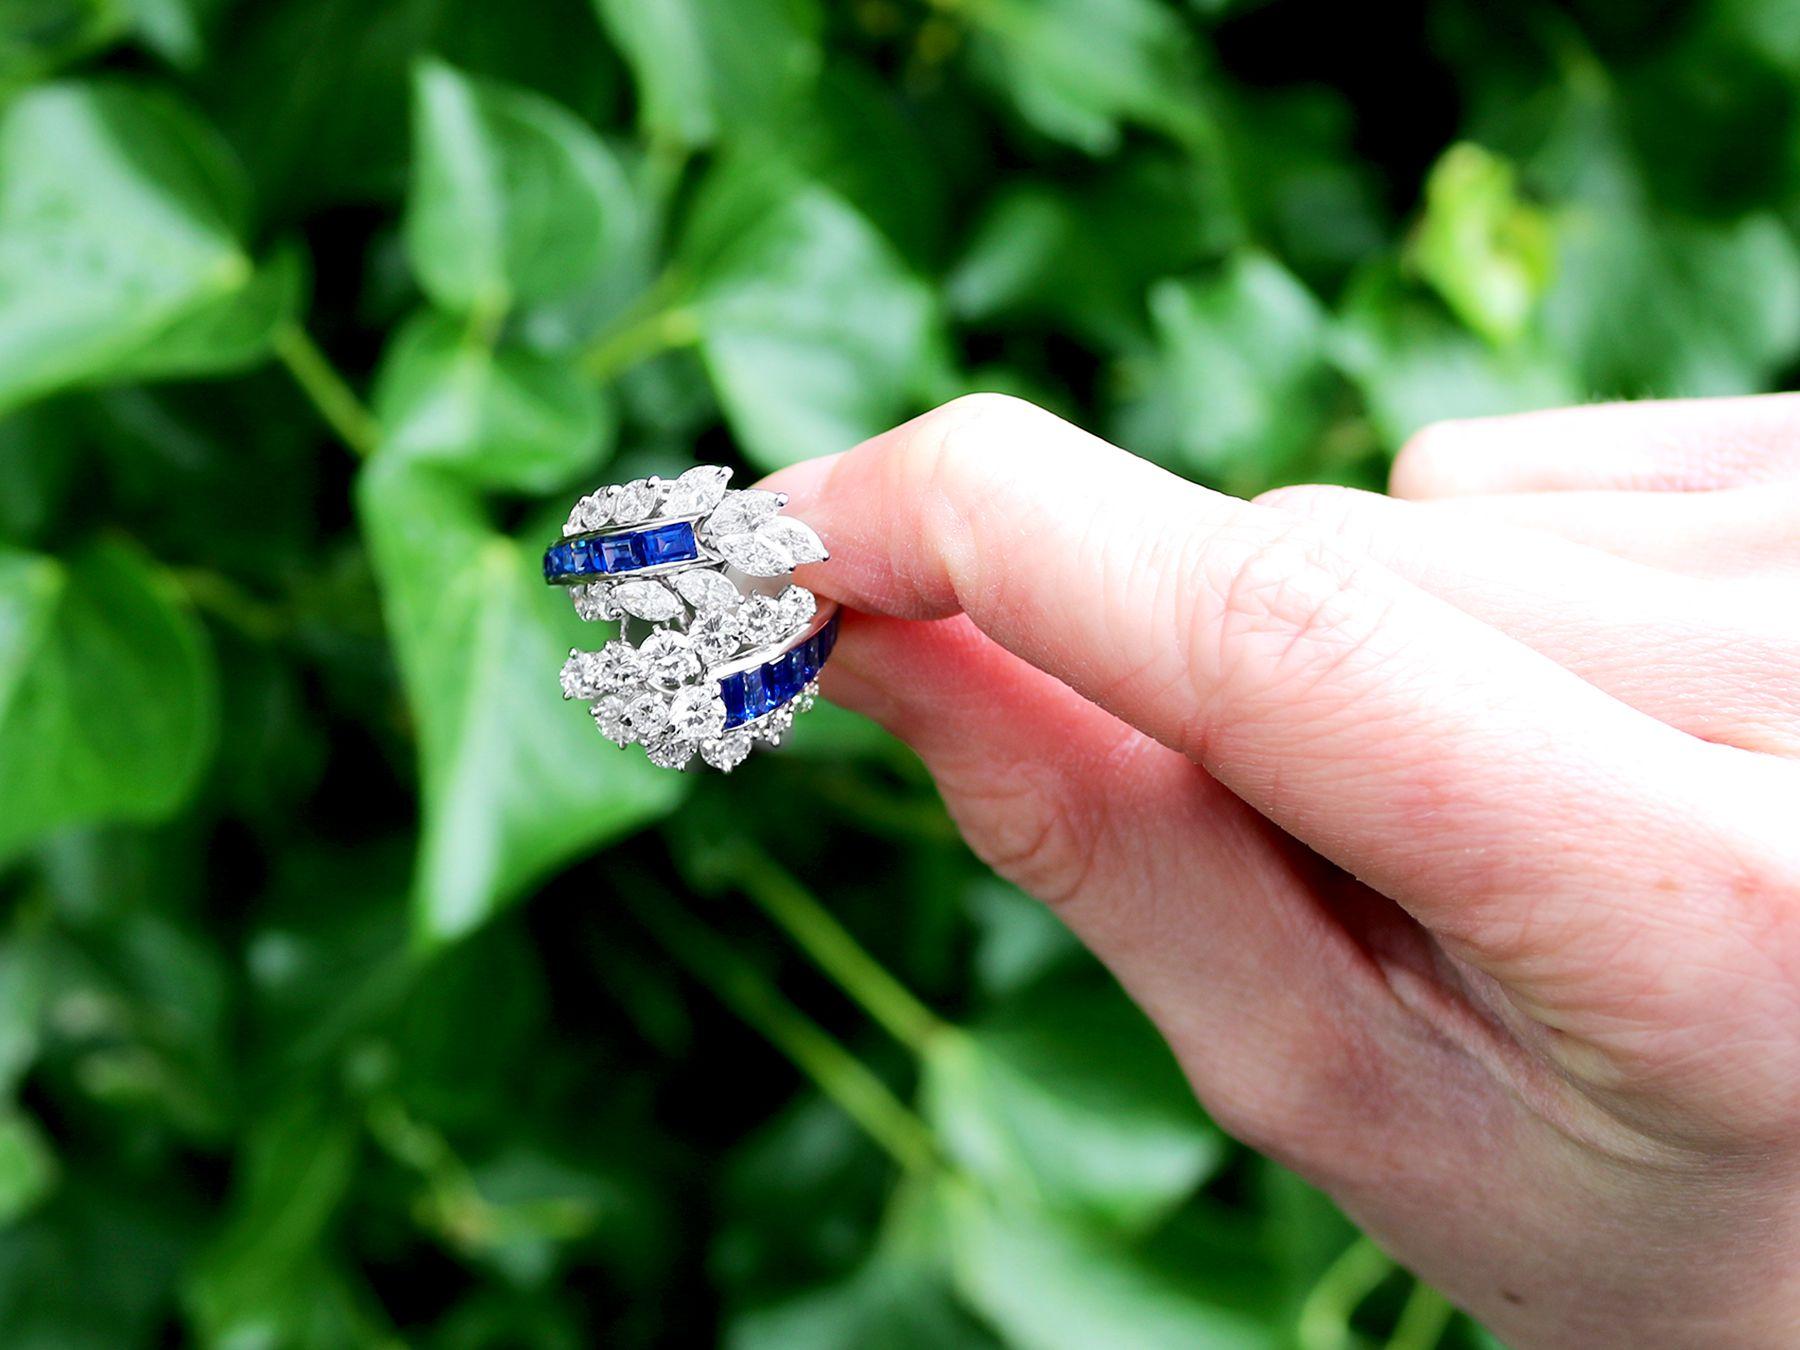 A stunning, fine and impressive vintage 1.42 carat blue sapphire and 3.22 carat diamond, 18 karat white gold cocktail ring; part of our diverse vintage jewelry collections

This stunning, fine and impressive vintage sapphire and diamond dress ring